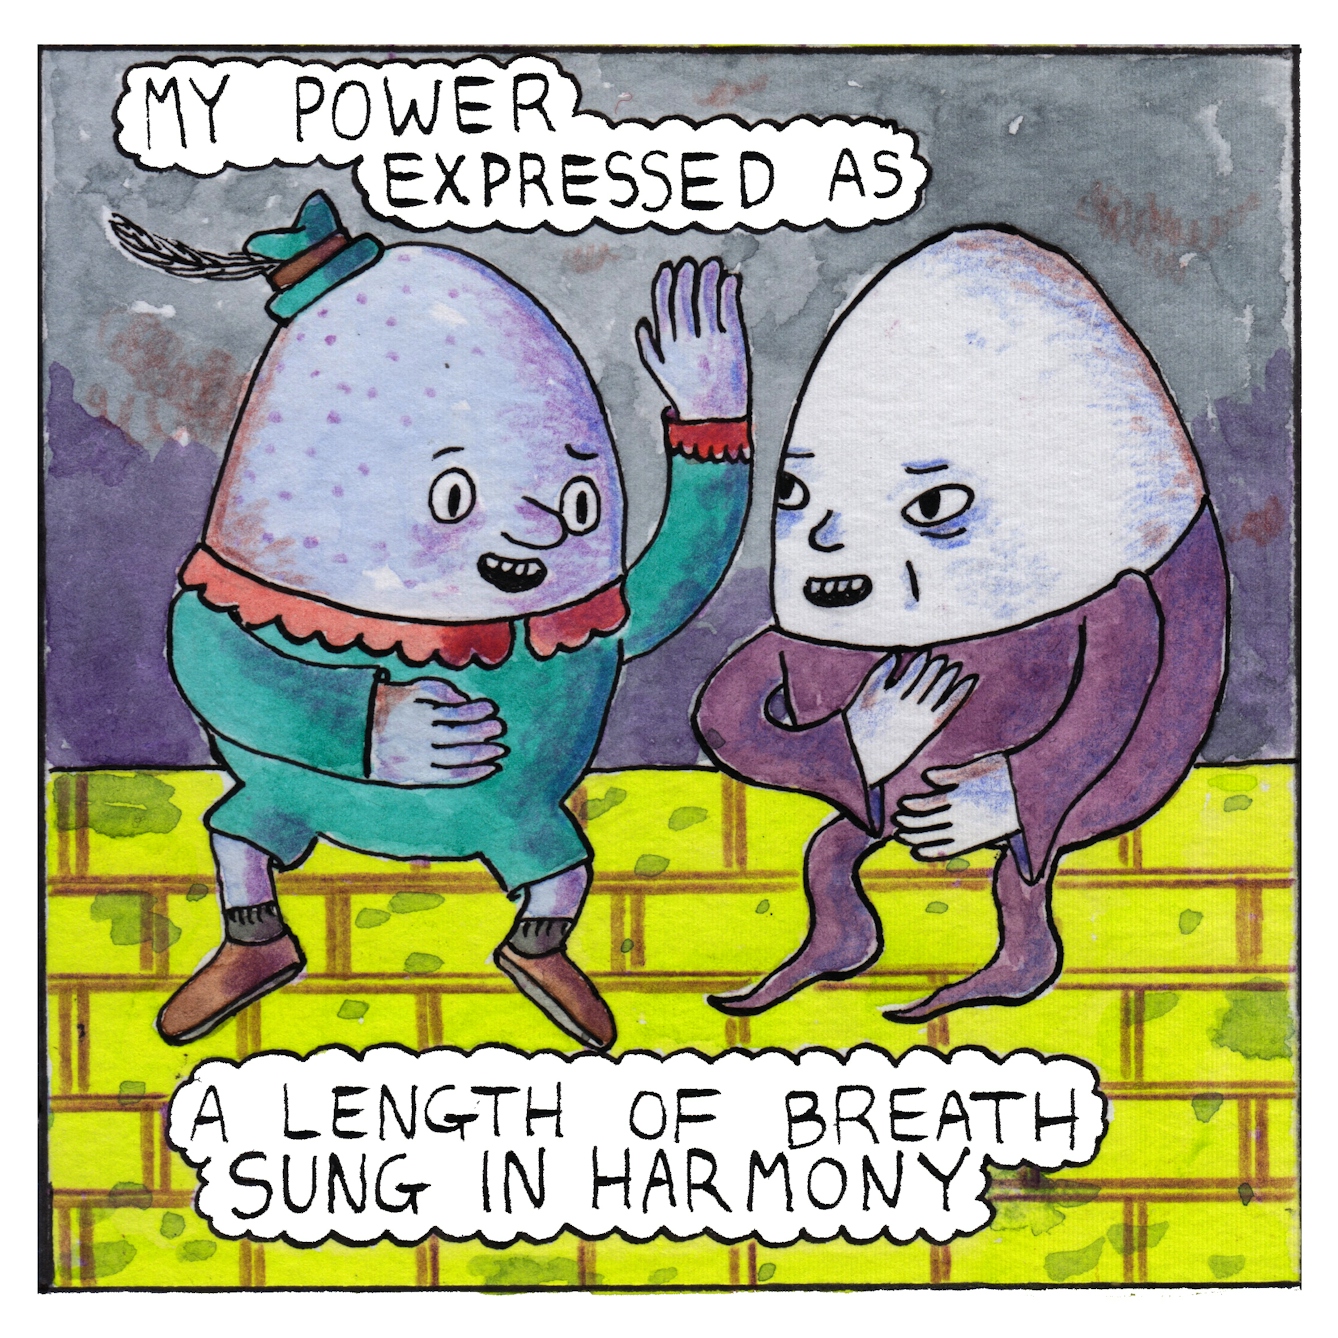 Panel 6 of comic 'Egg Inc.': Two egg-shaped characters sit on a yellow-brick wall looking at each other, their mouths open, gesticulating with their arms. A text bubbles above and below them say "My power expressed as a length of breath sung in harmony